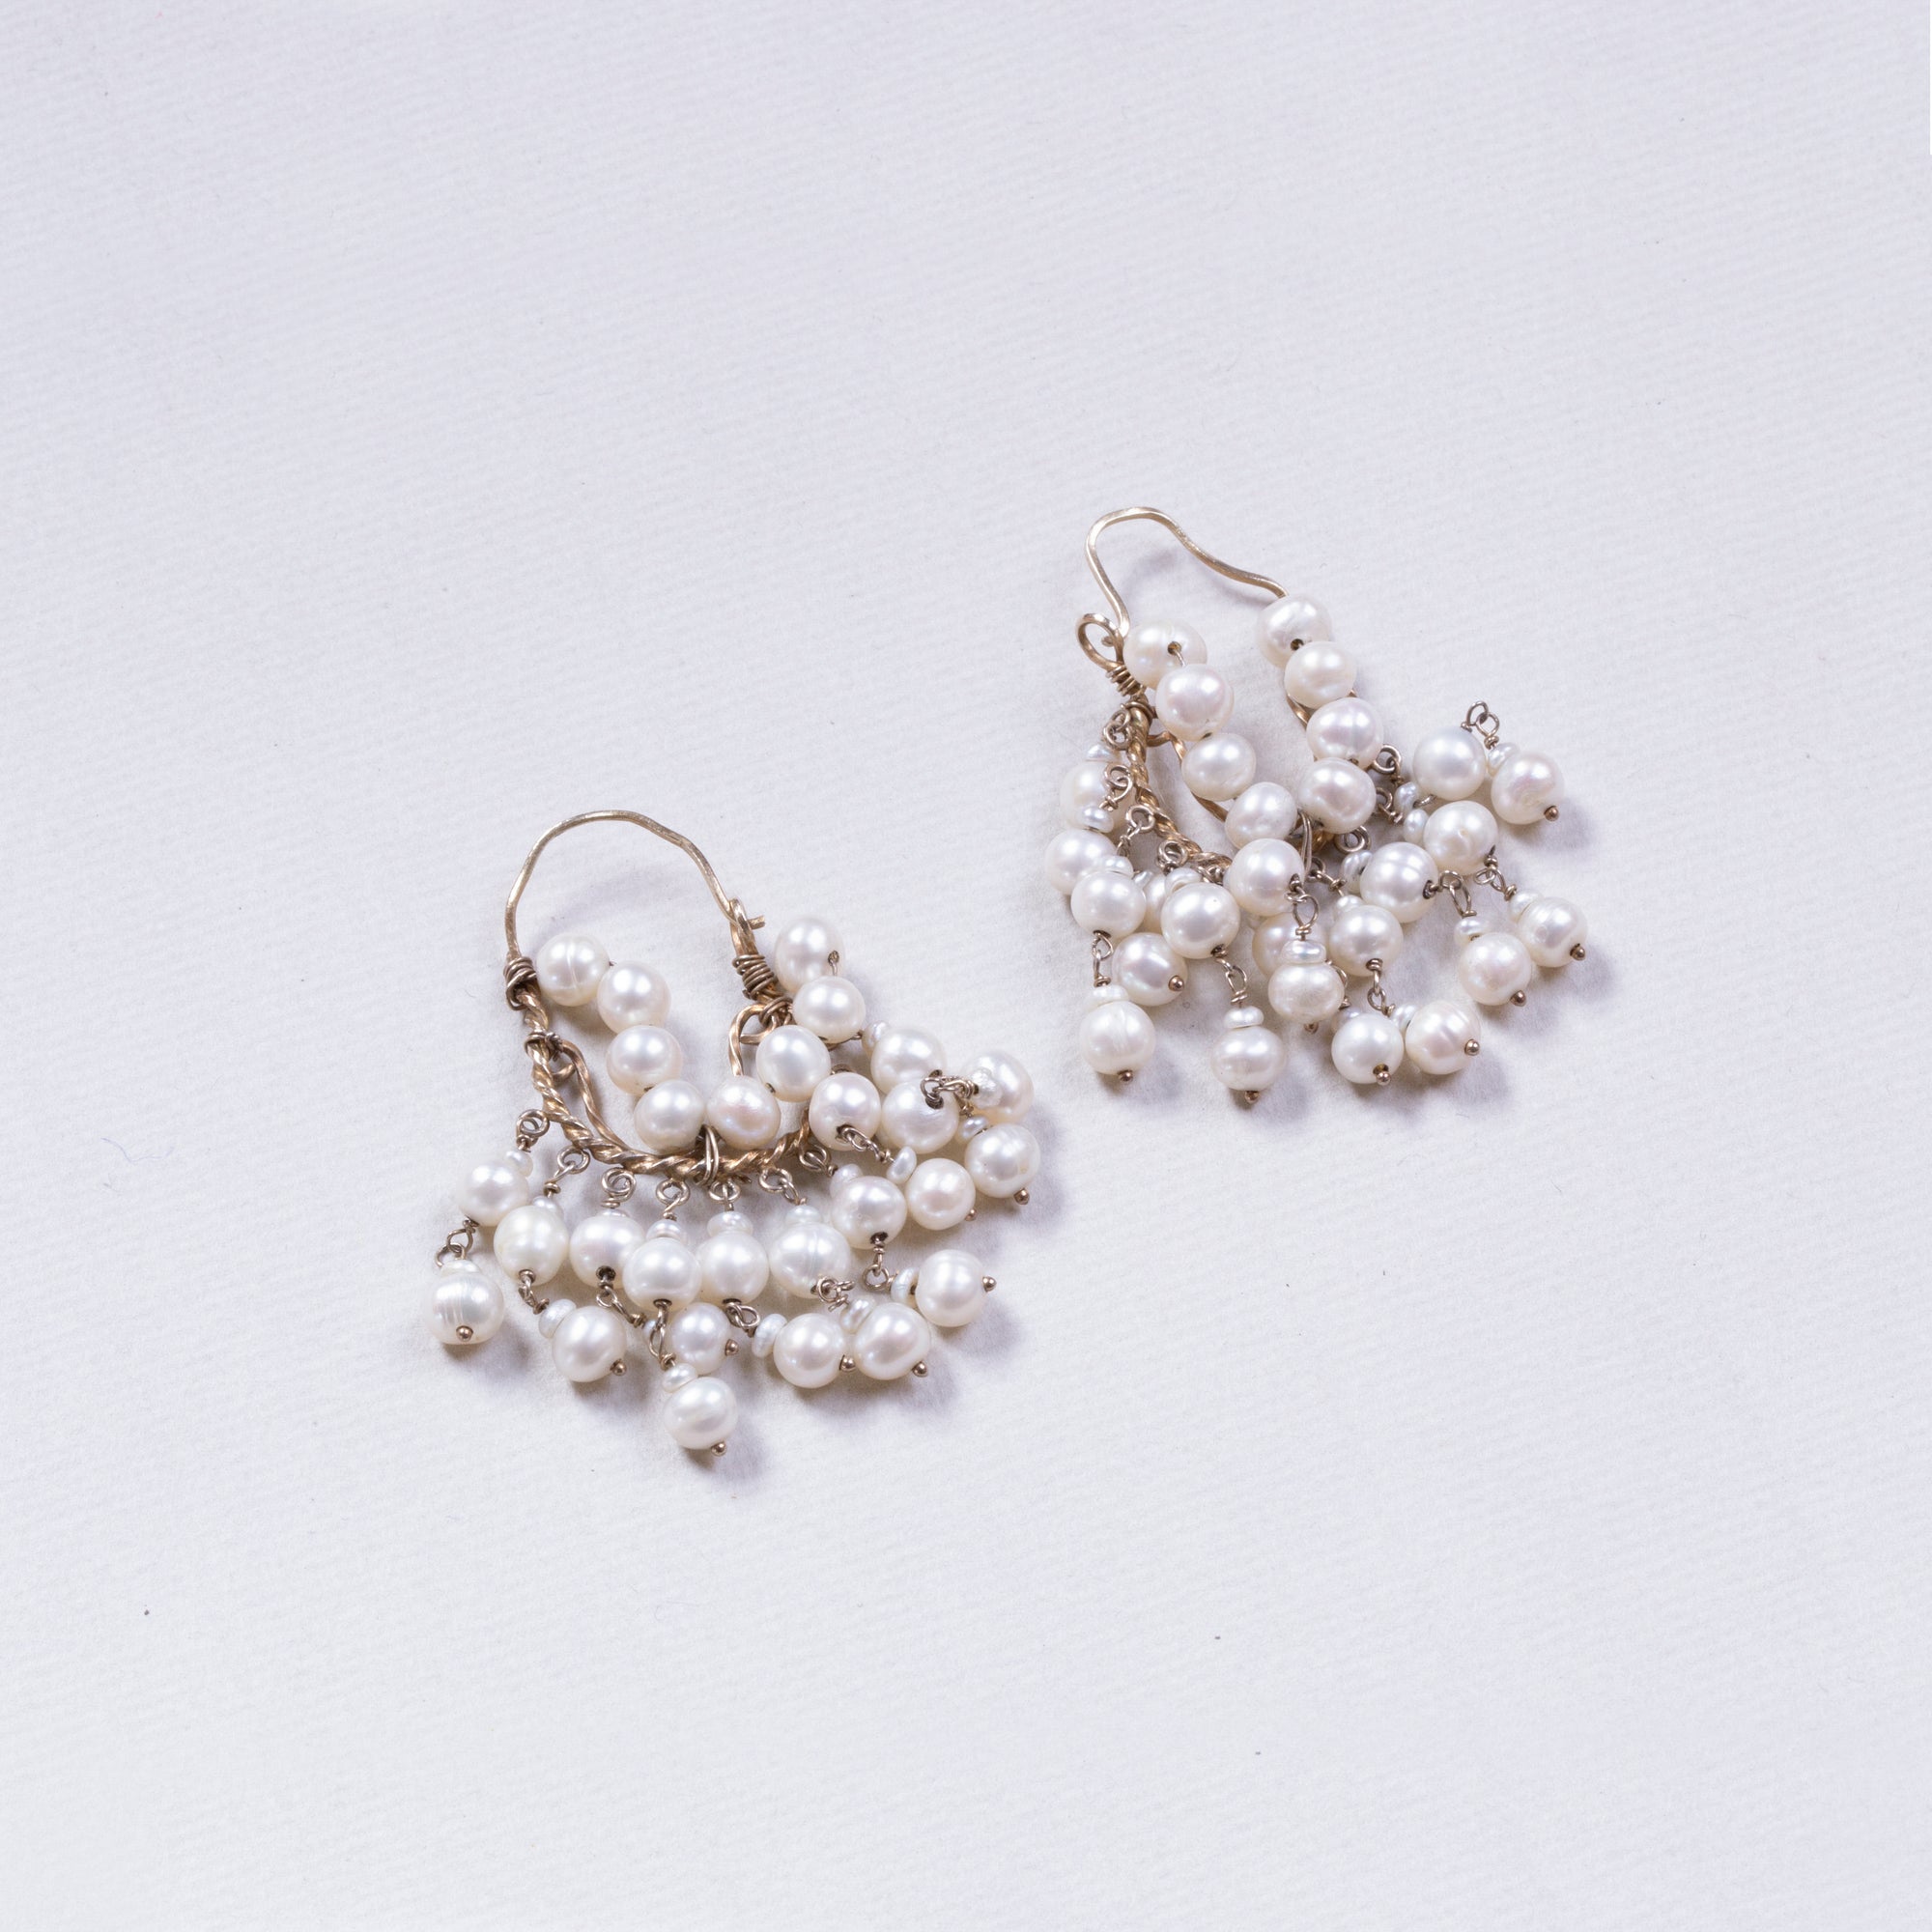 Gold Plated Wire Earrings with Pearls